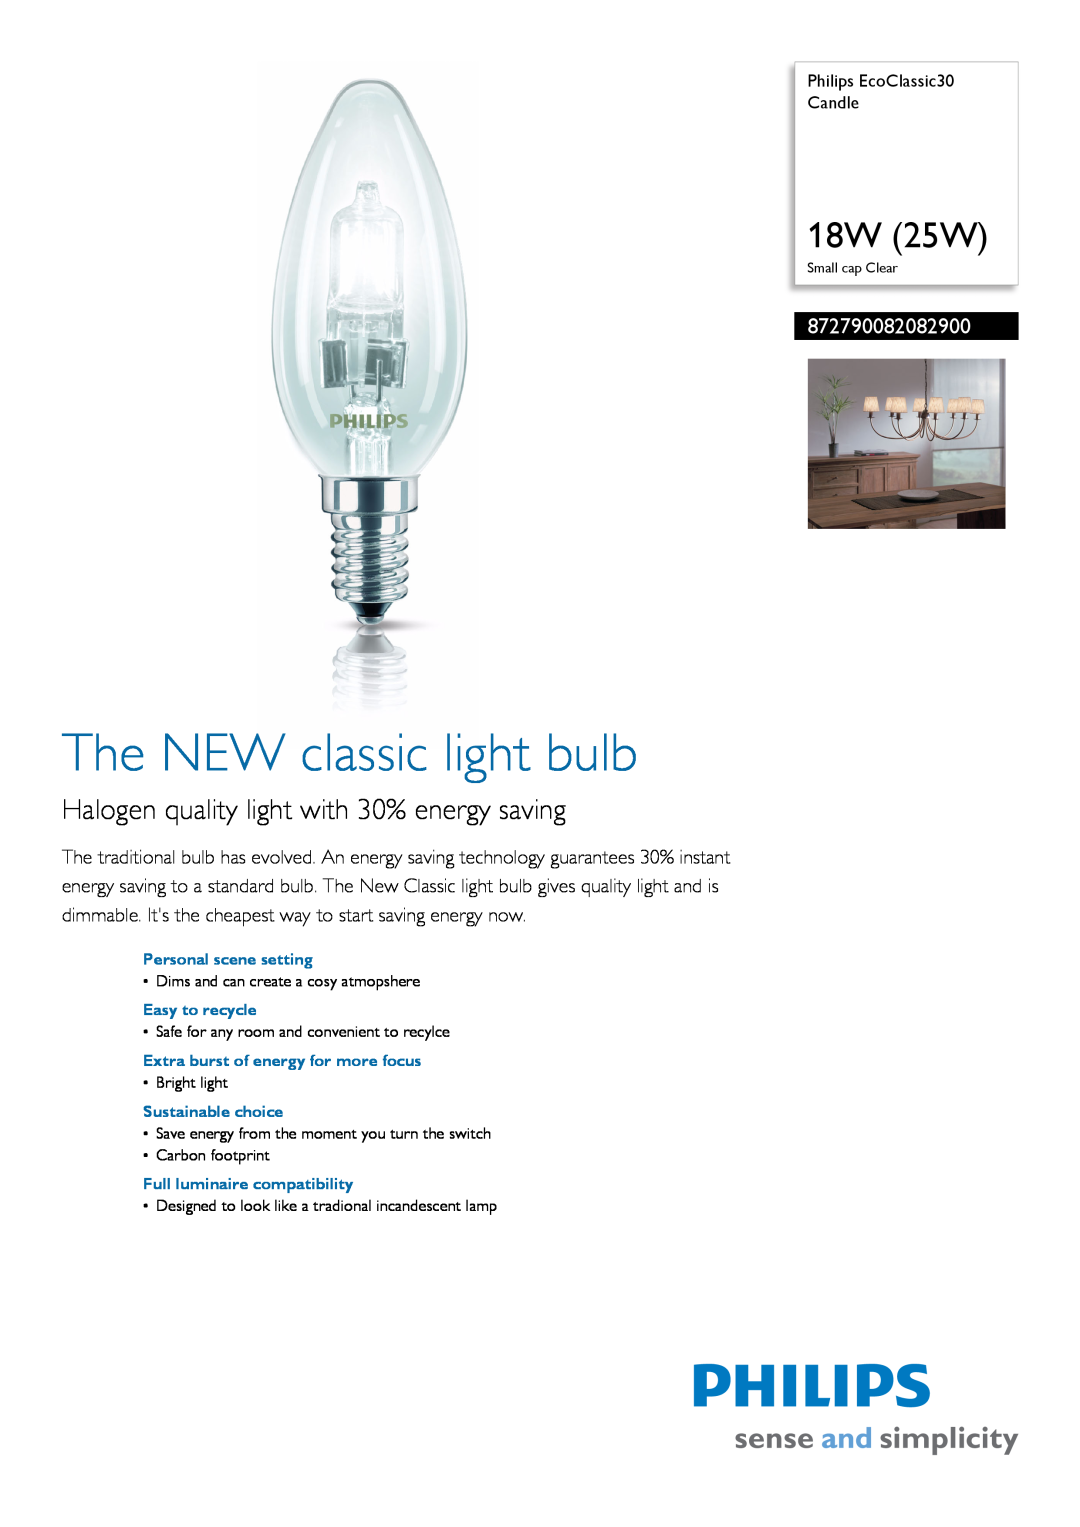 Philips 8.73E+14 manual 872790082098000, The NEW classic light bulb, 42W 60W, Halogen quality light with 30% energy saving 